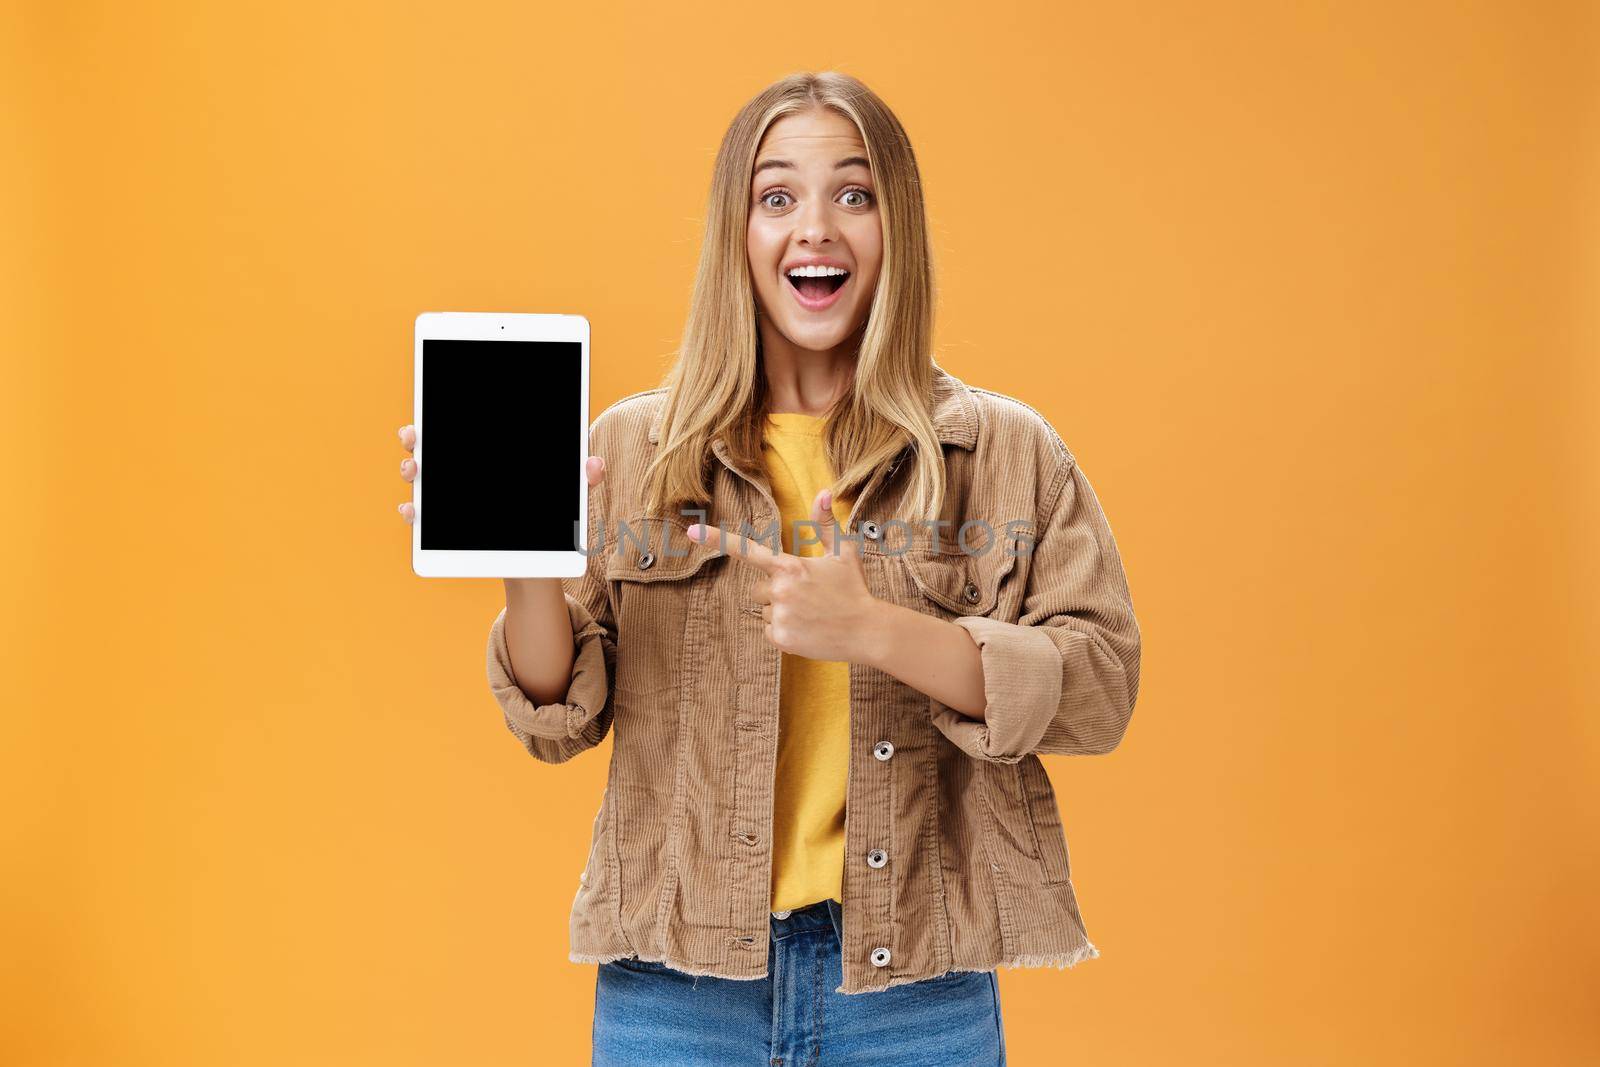 Woman showing friends new digital tablet first purchace of autumn. Charismatic and enthusiastic excited caucasian female with tanned skin and fair hair in corduroy jacket pointing at gadget screen. Emotions and technology concept